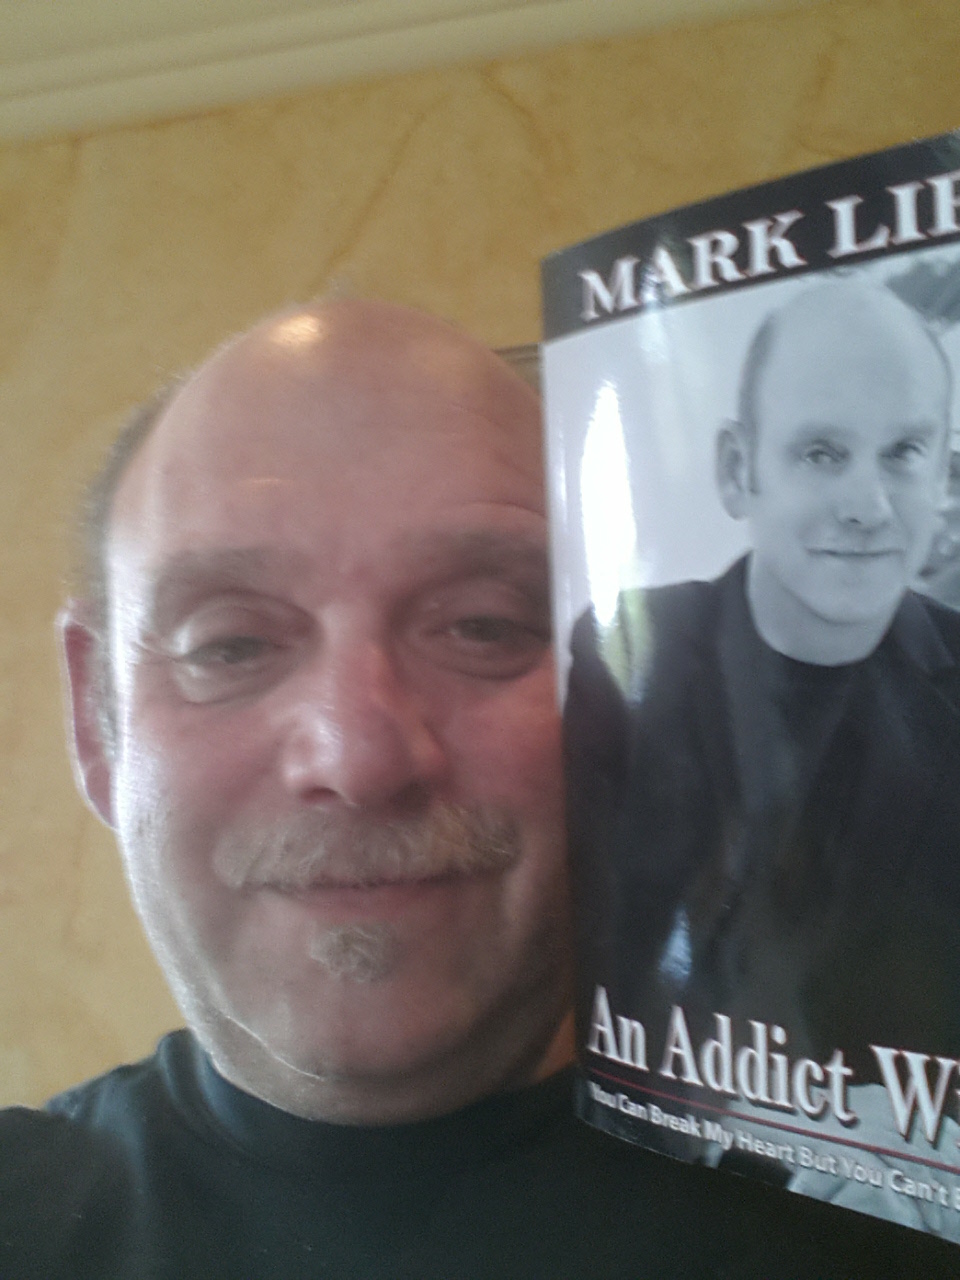 Selfie of Author Mark Lipp and his new book An Addict Within